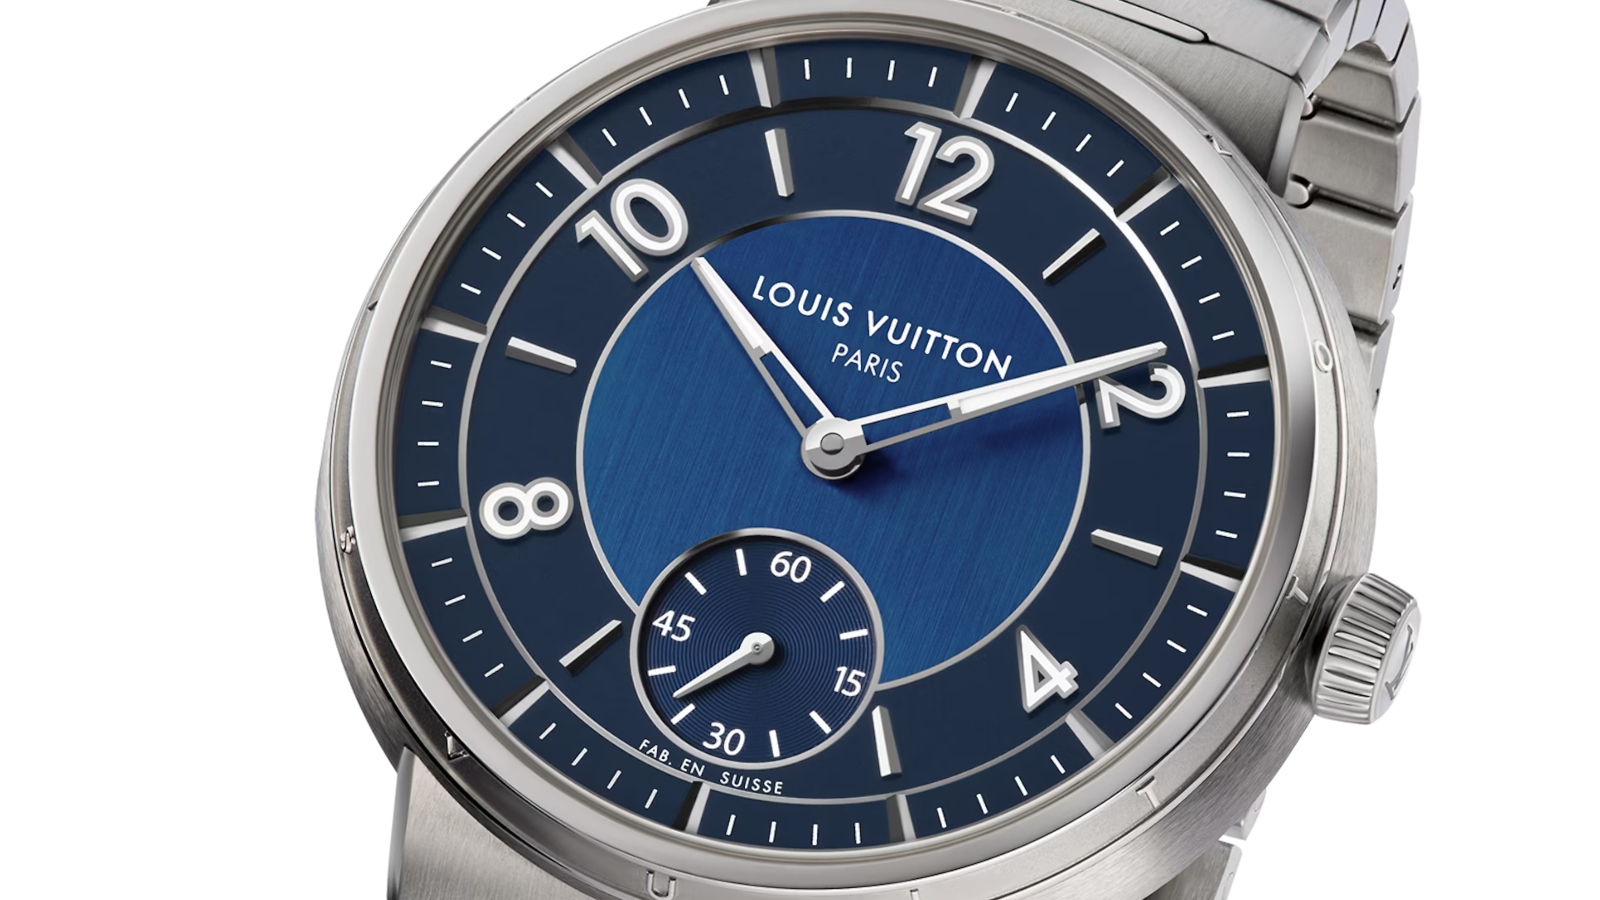 Louis Vuitton Relaunches the Tambour as a Sleek Sports Watch With